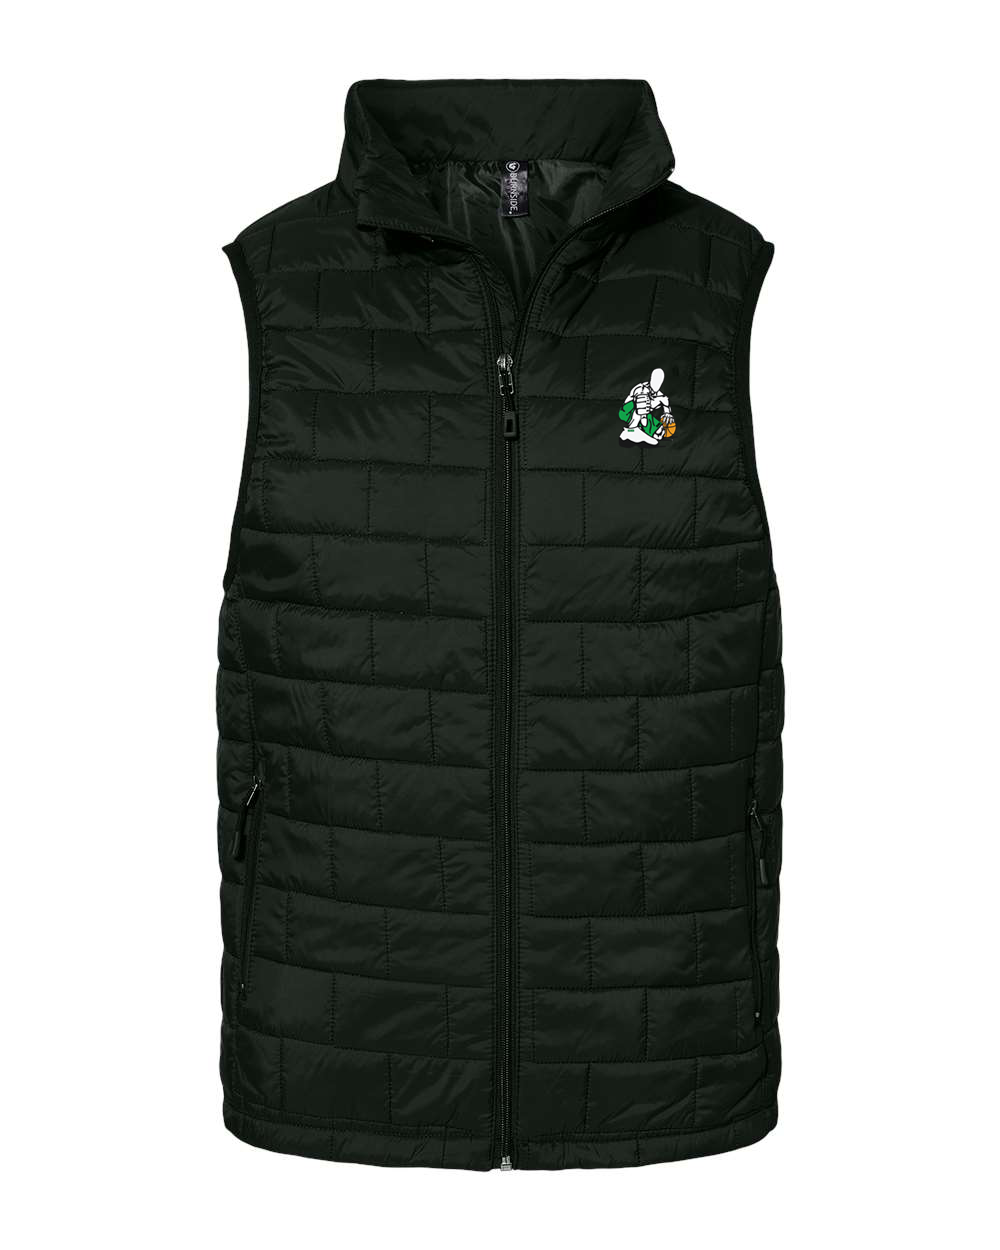 BLK SID GREEN DIAMOND QUILTED EMBROIDERY VEST